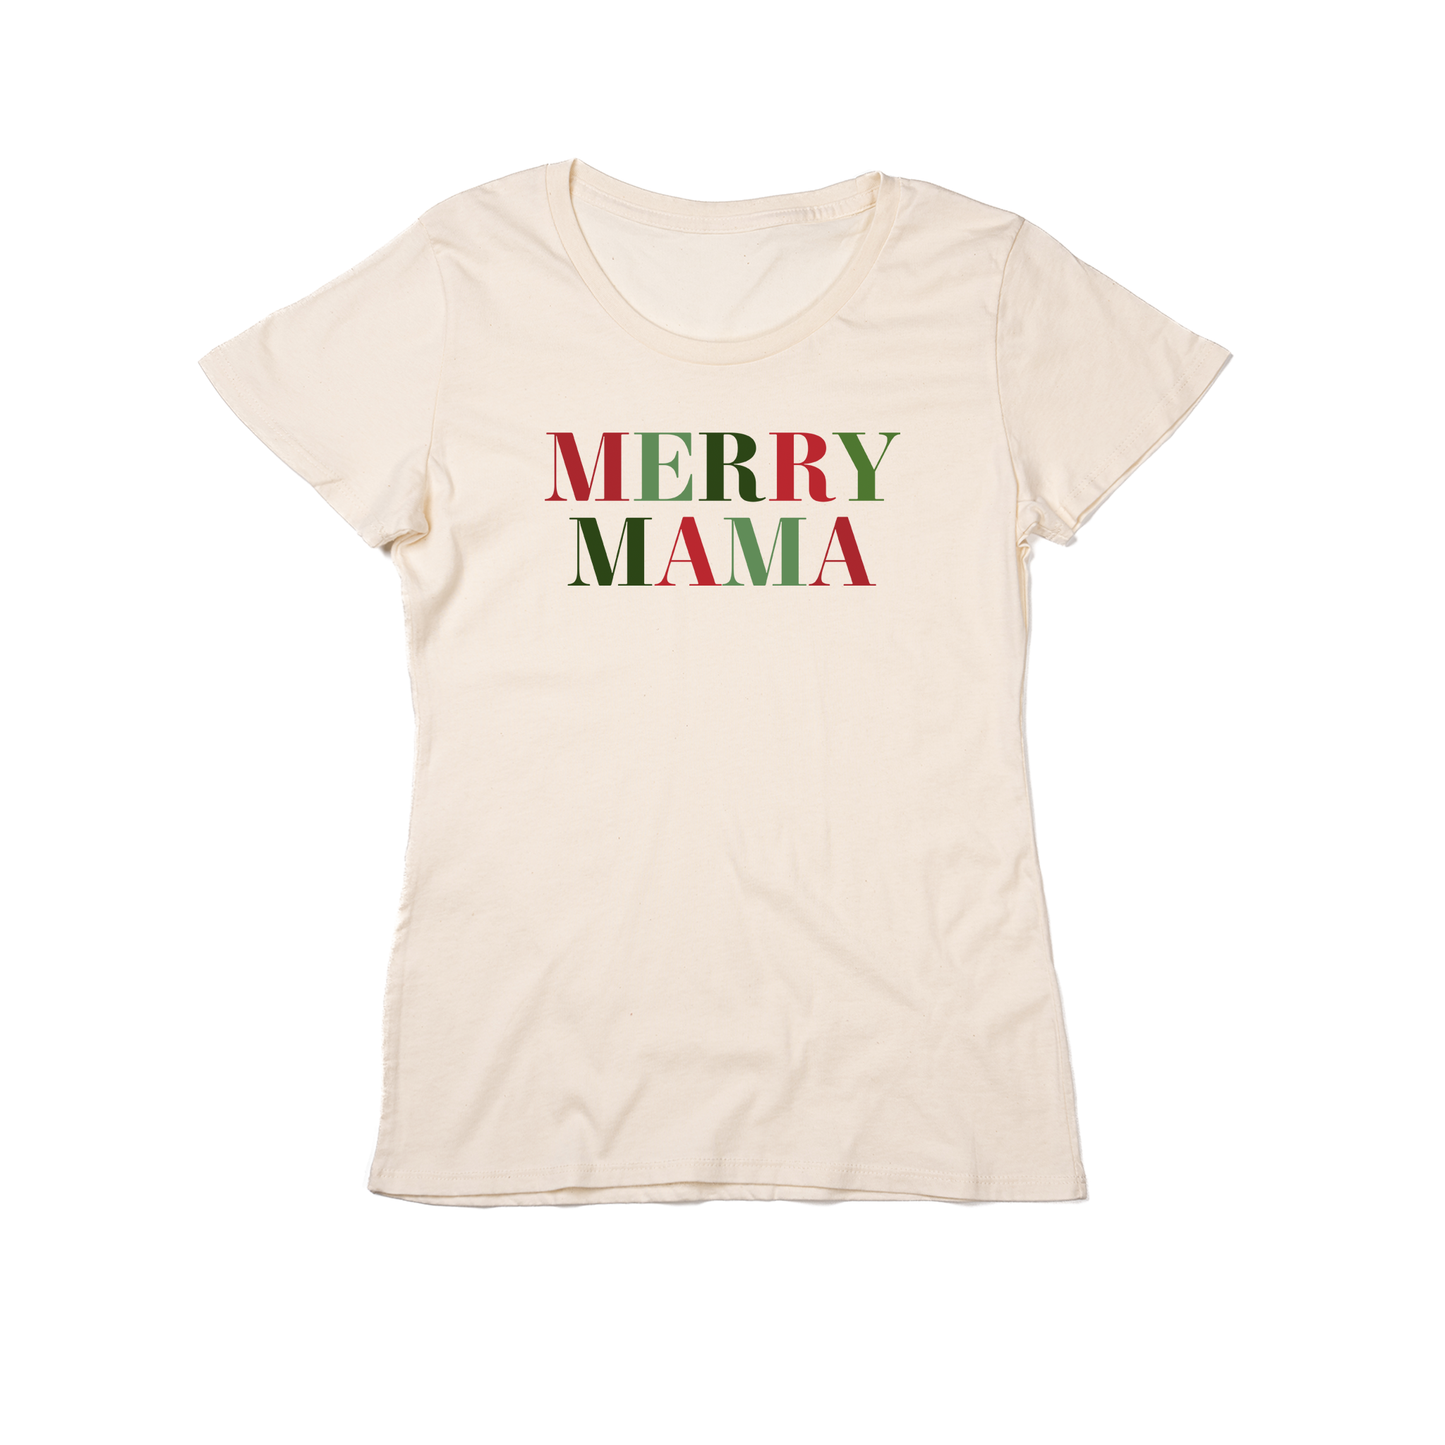 MERRY MAMA - Women's Fitted Tee (Natural)